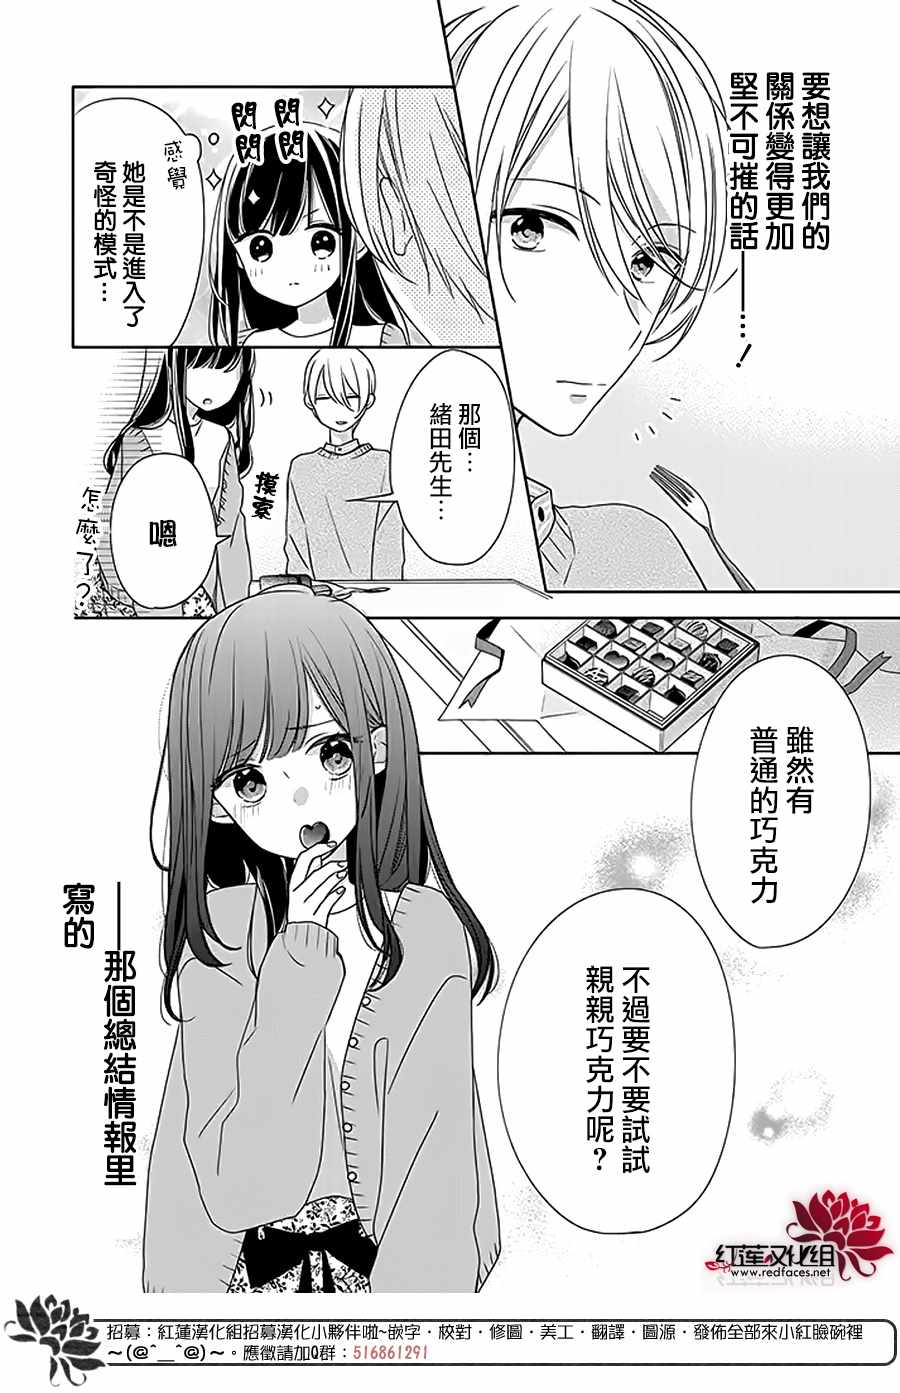 《If given a second chance》漫画 second chance 033集